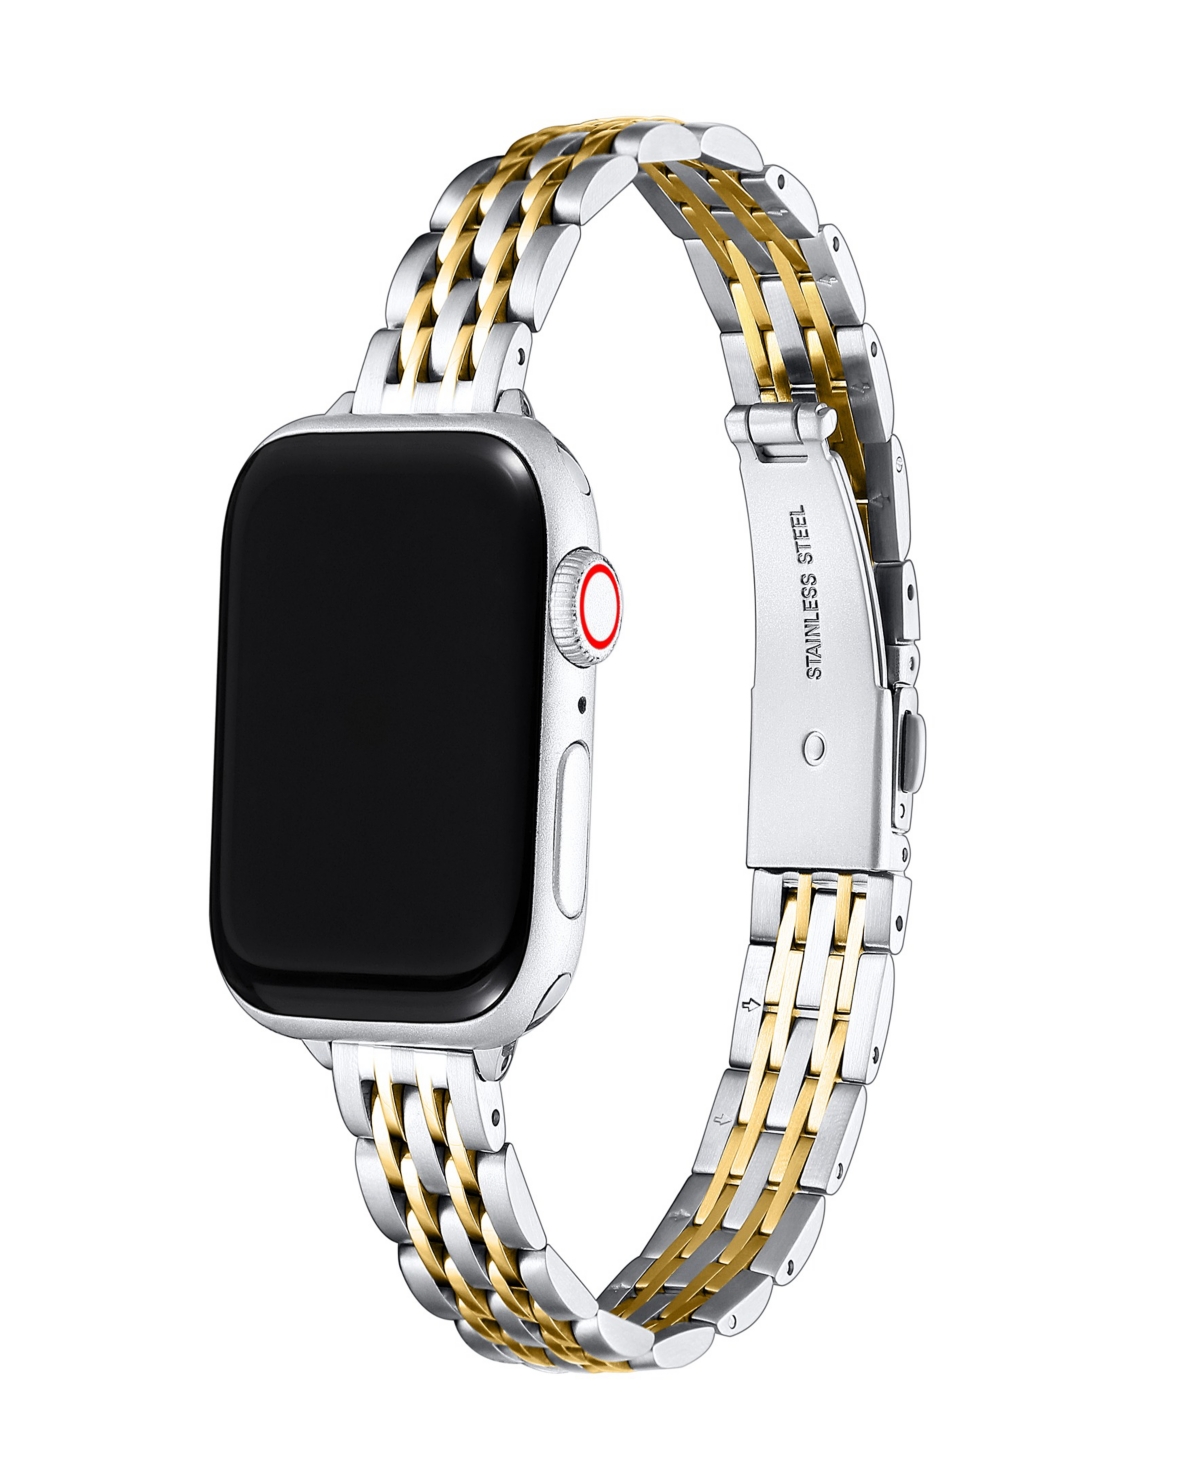 Posh Tech Unisex Skinny Rainey Stainless Steel Band For Apple Watch Size- 38mm, 40mm, 41mm In Two Tone